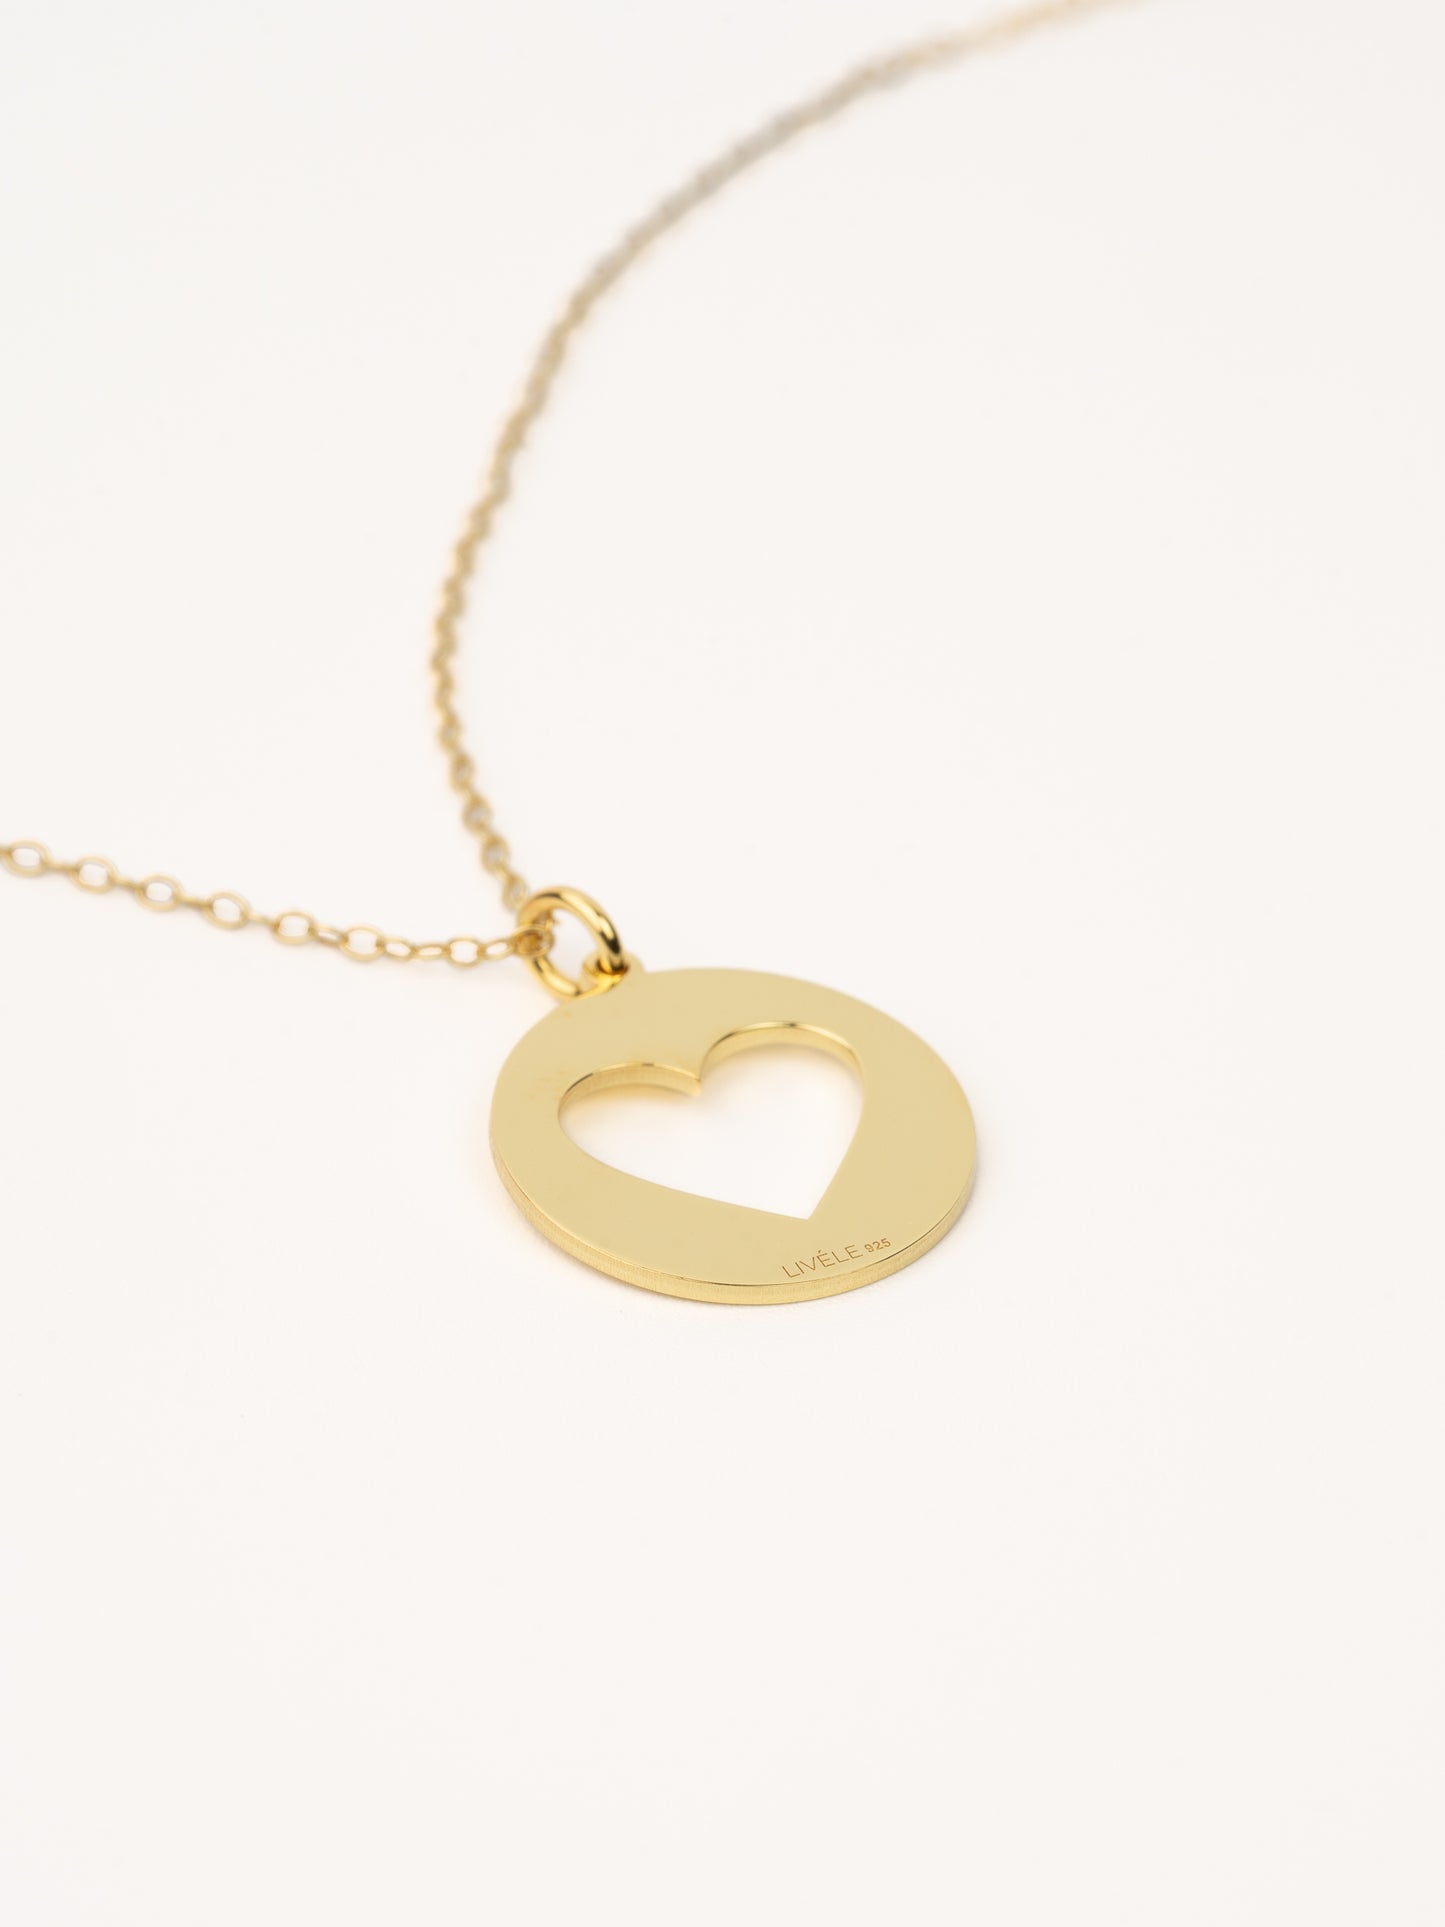 P.S. I LOVE YOU NECKLACE